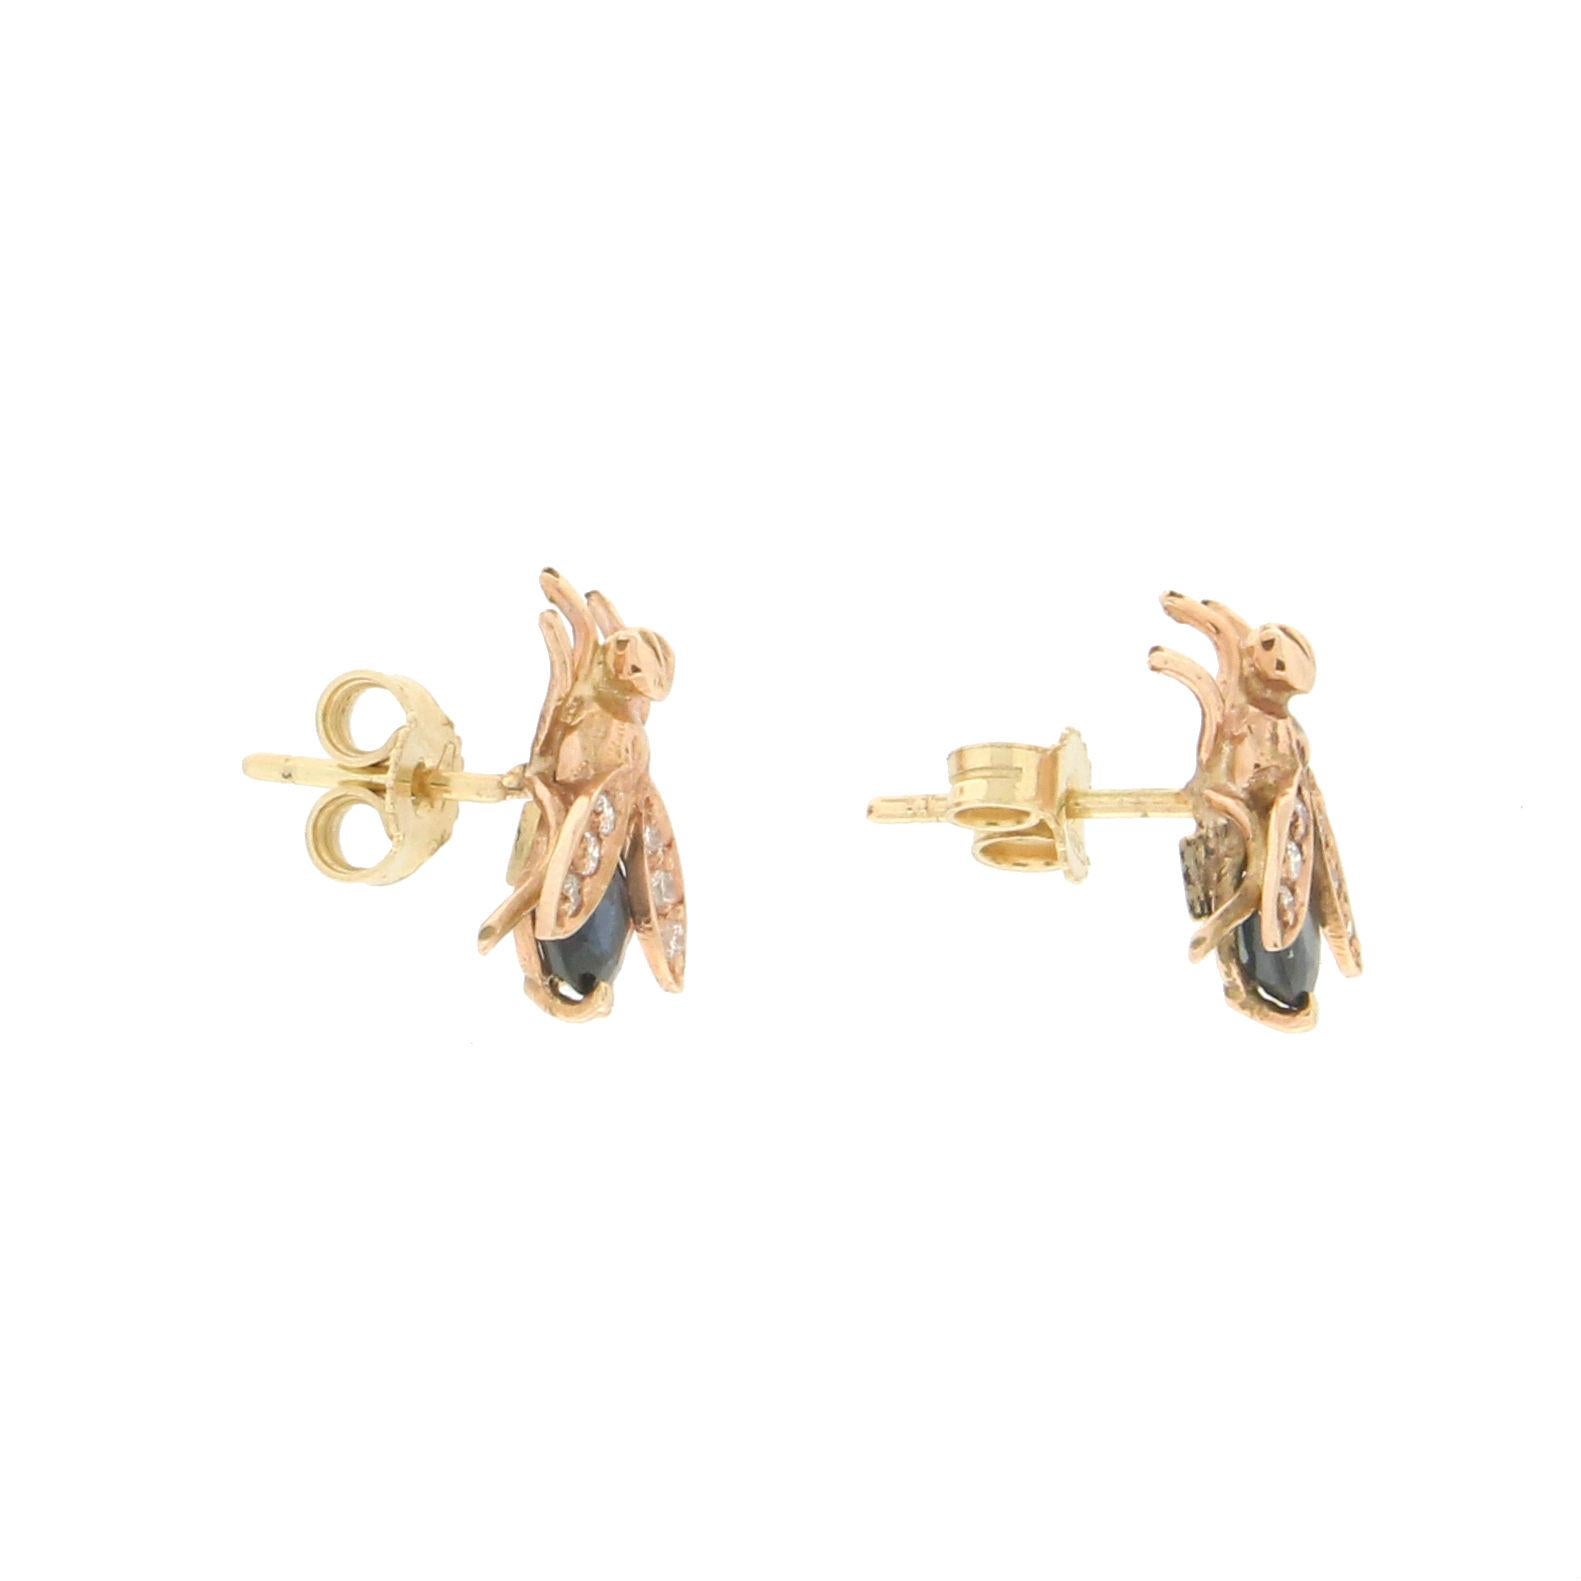 Beautiful earrings of small flies made in 14 karat gold  with precision and entirely by hand by our skilled artisans.
The flies have a particular meaning in the culture of the jewel, the legend tells that they were worn by the Egyptians to be